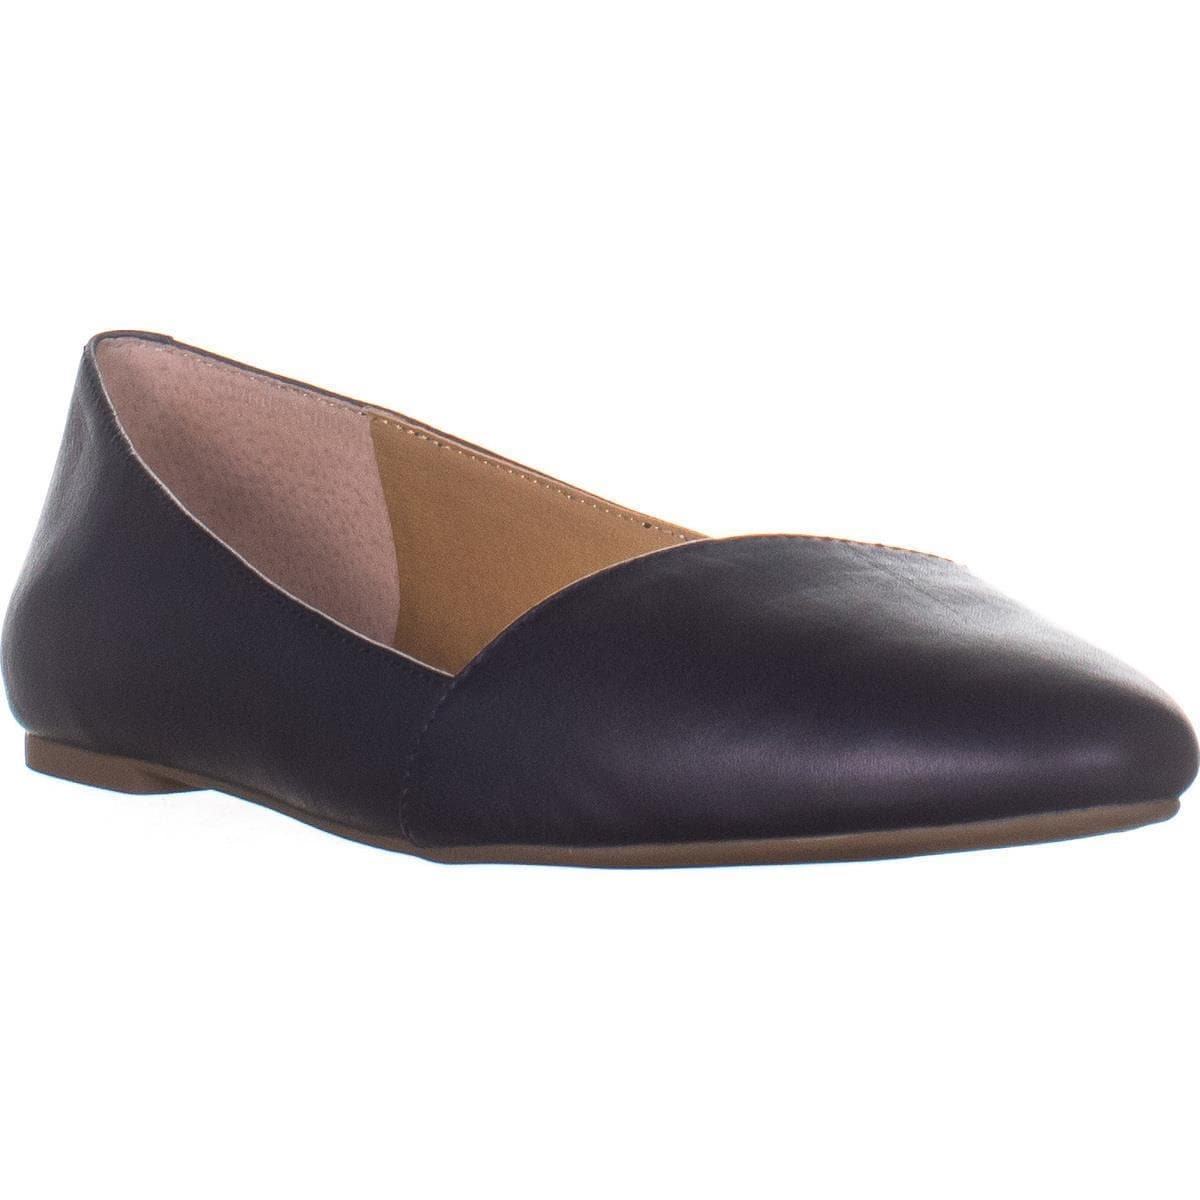 lucky brand archh flats black leather